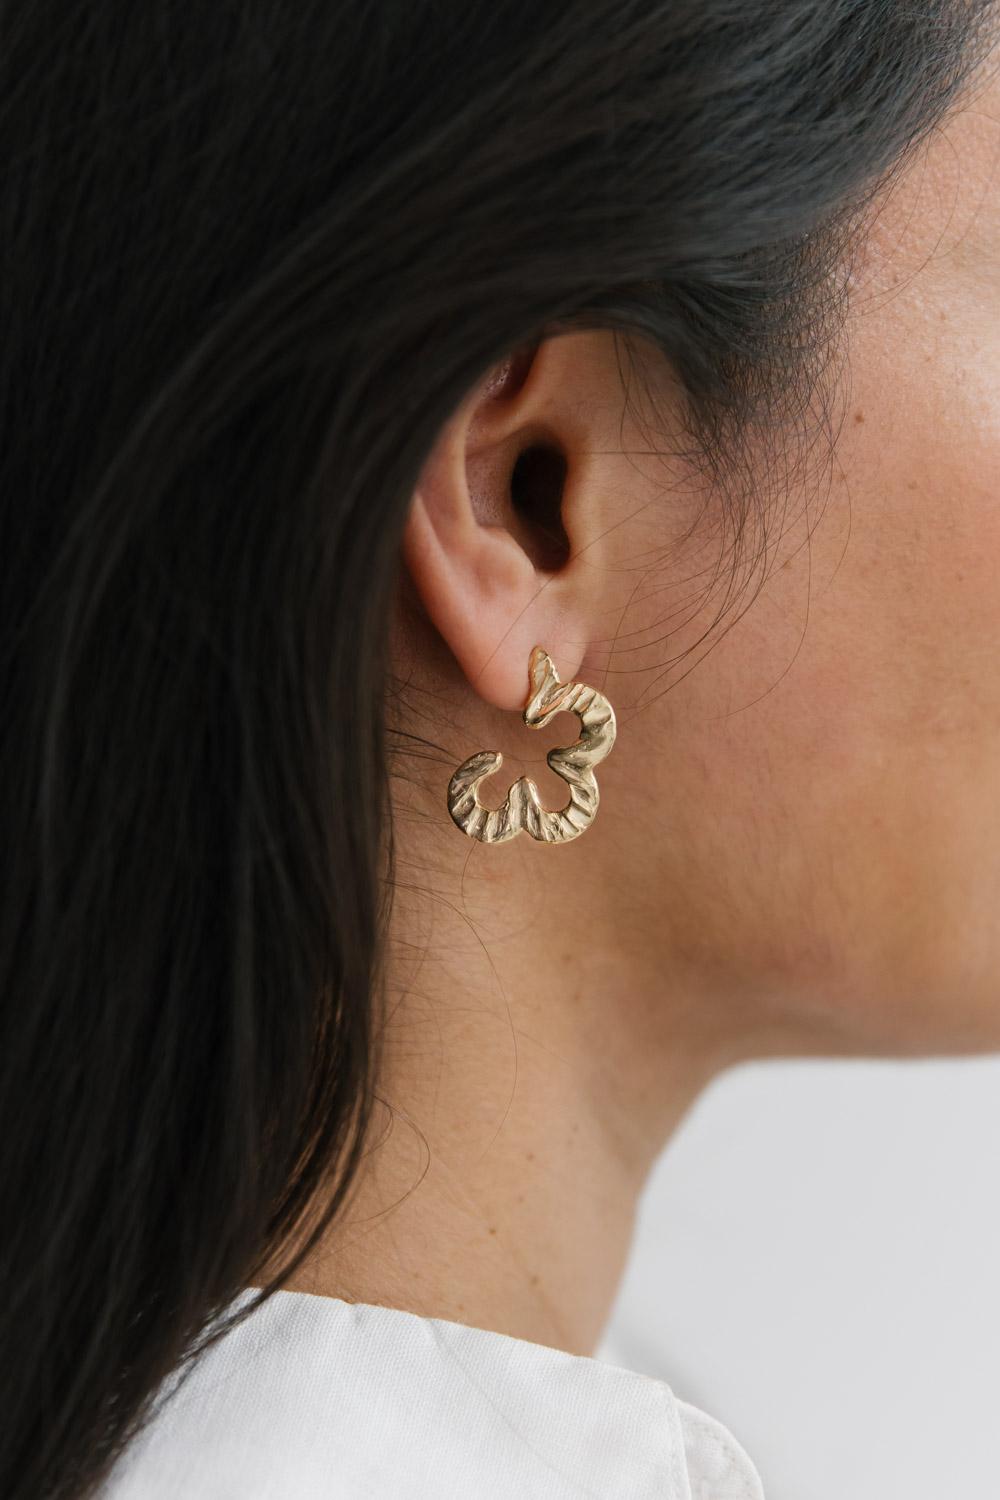 Detail of a single gold daisy earring design on the right ear of a woman of colour